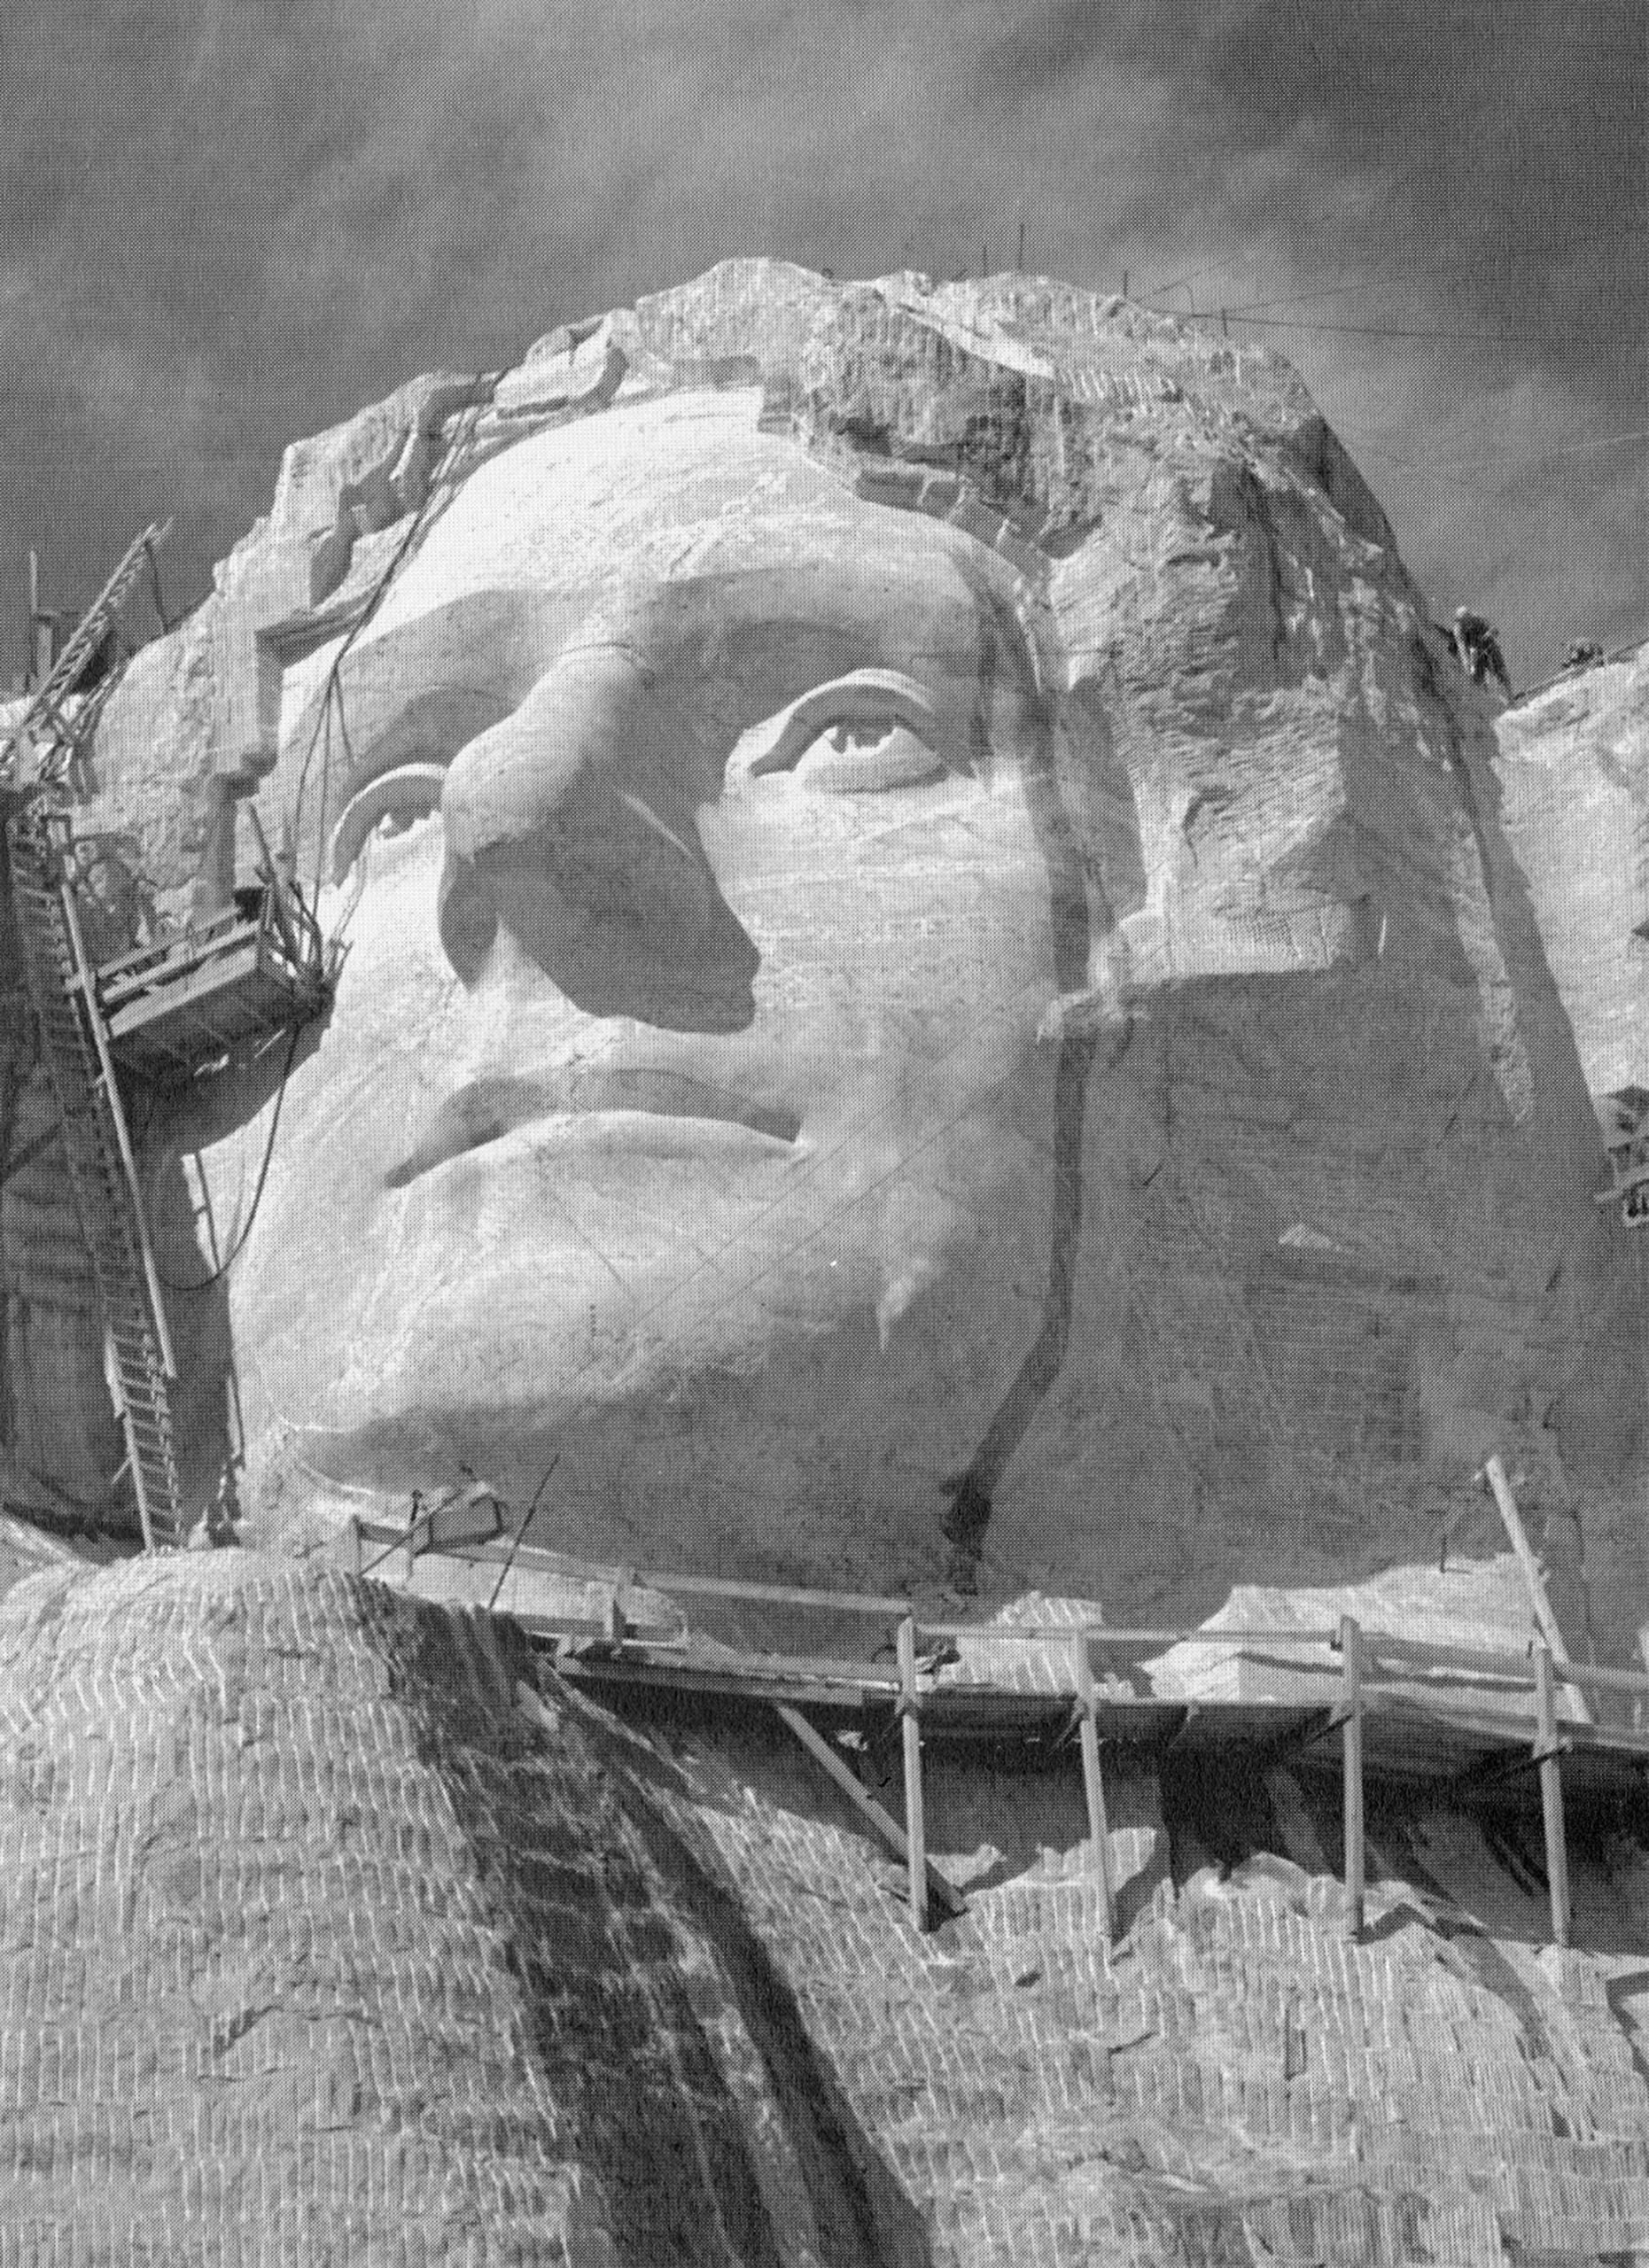 A closer view of the face of Thomas Jefferson under construction, with drill marks below it, c. 1930s.